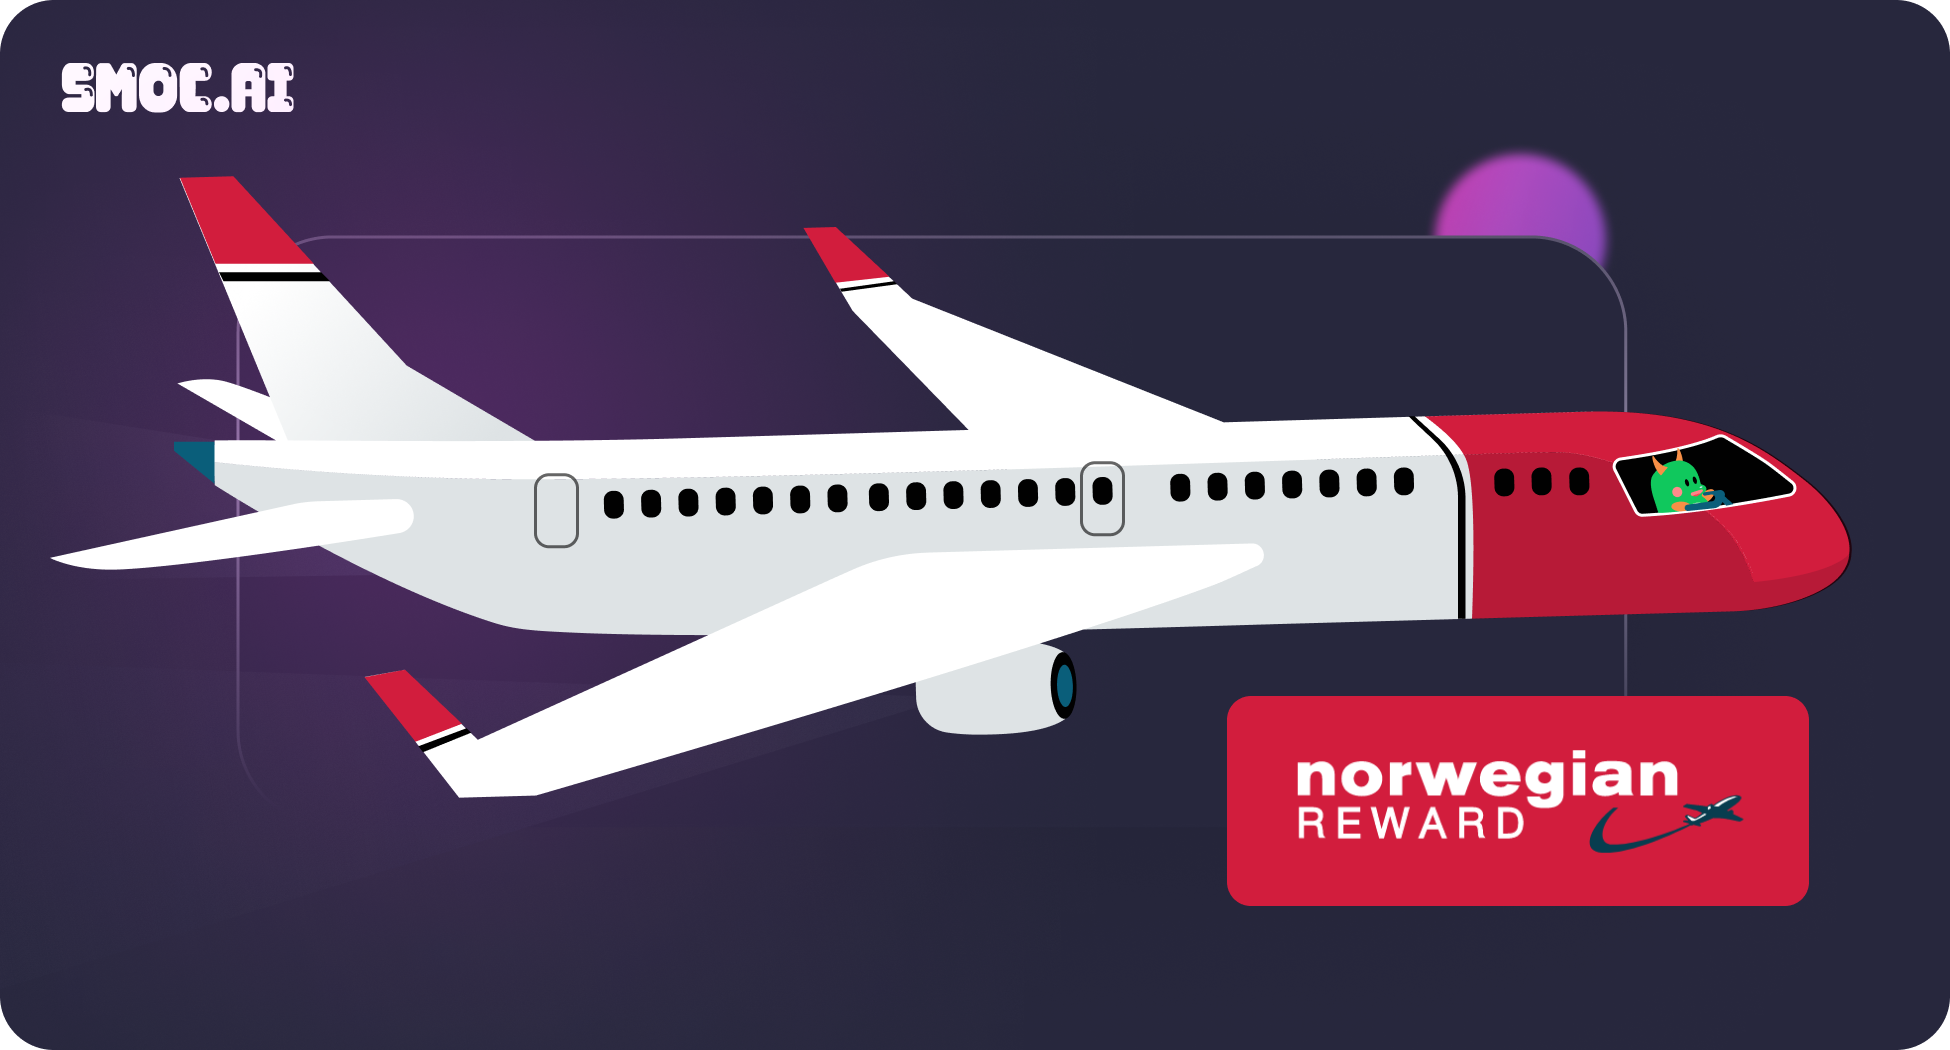 Norwegian's SMOC.AI Quiz Delivers 93% Interaction & 92% Completion